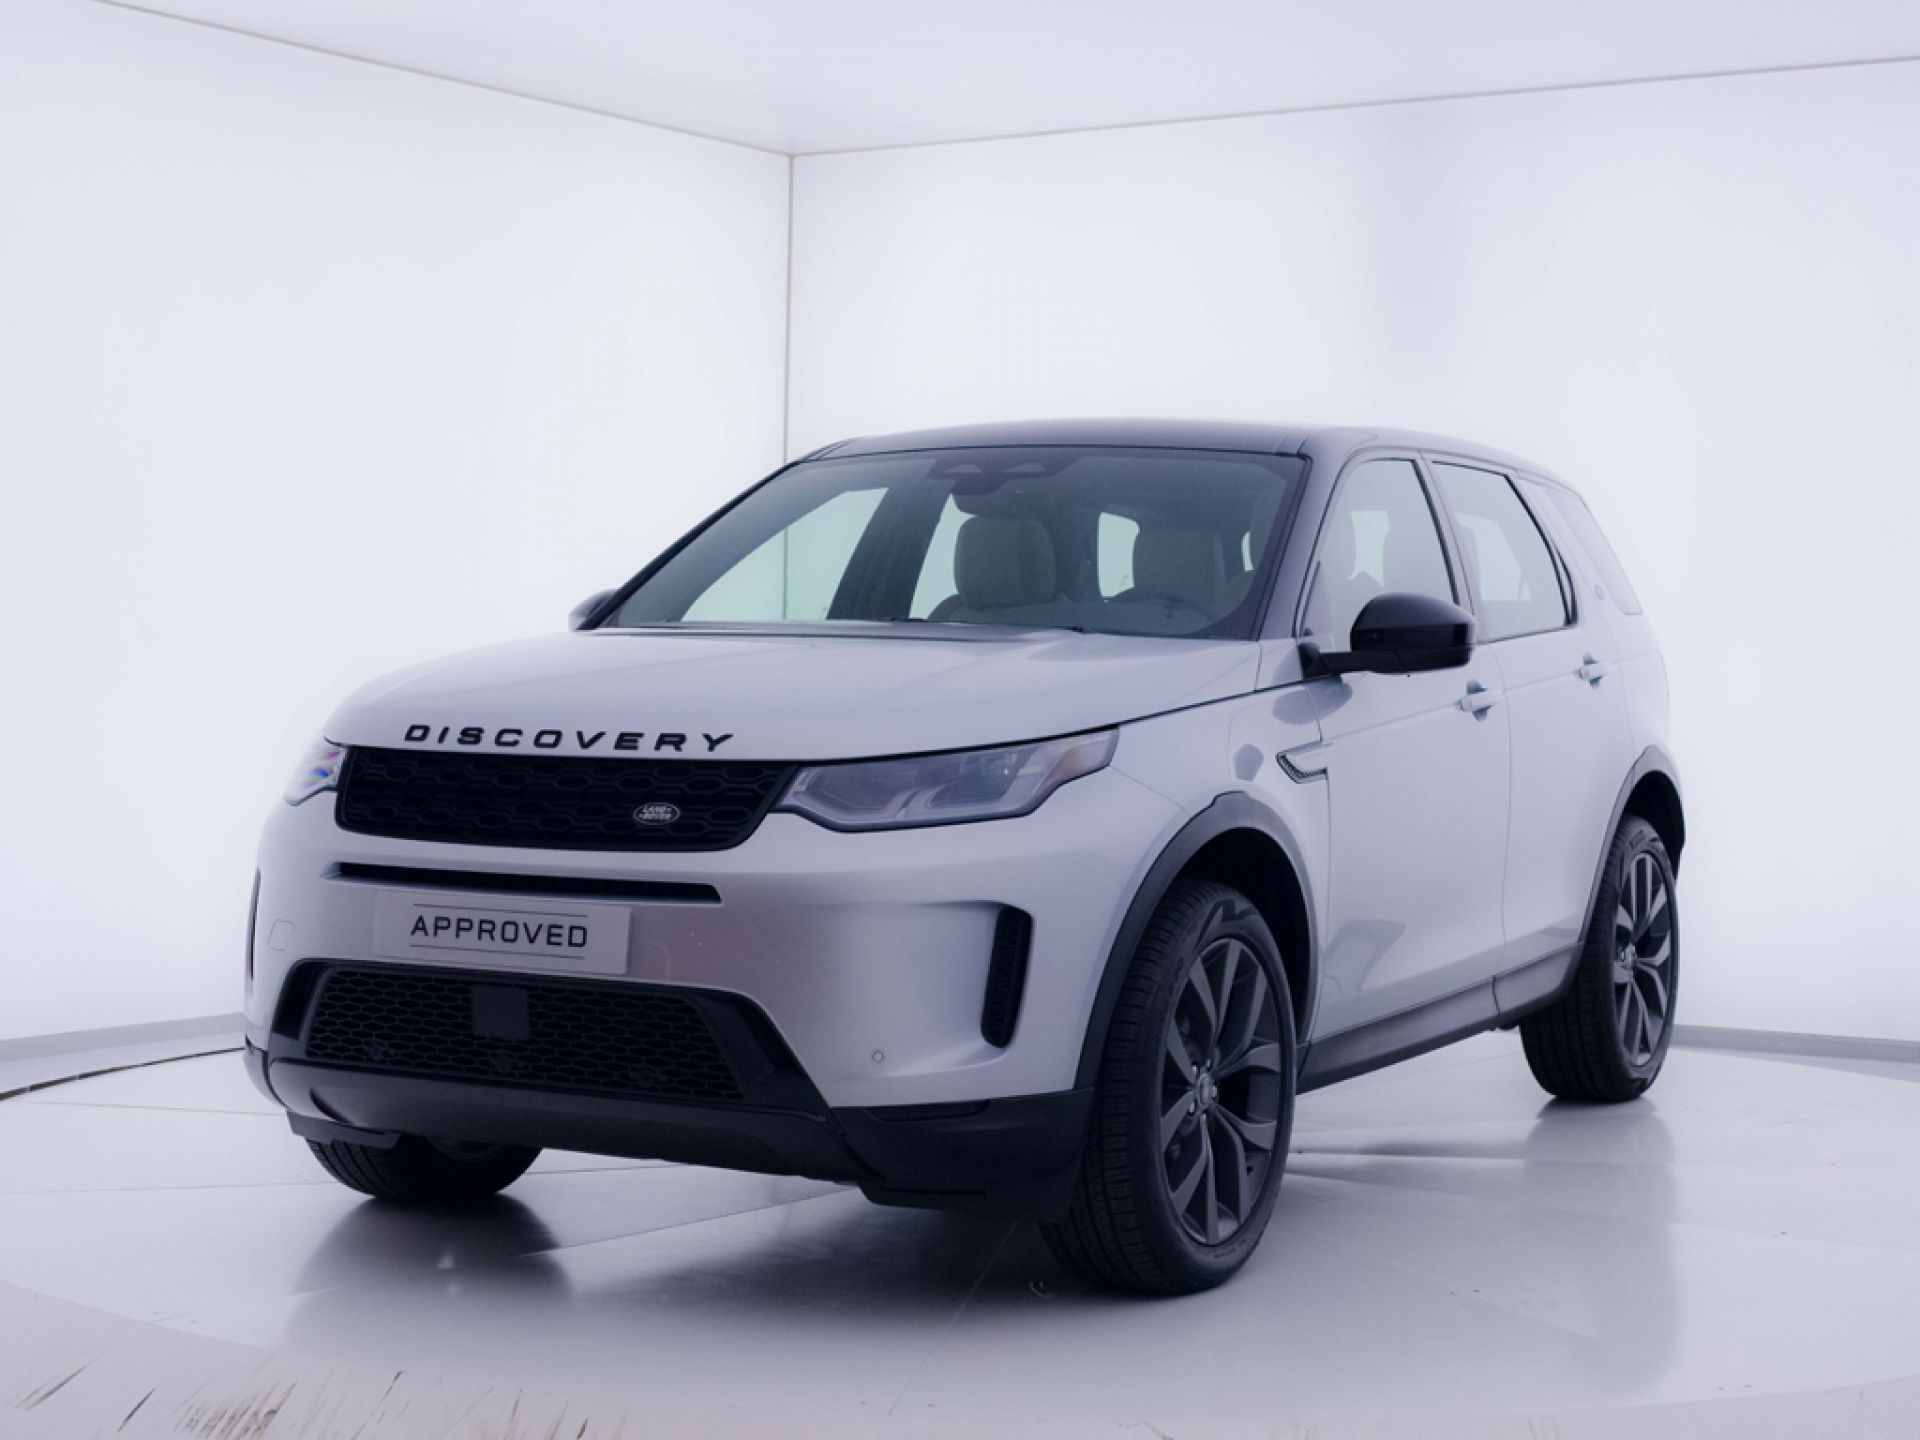 Land Rover Discovery Sport 2.0D TD4 204 PS AWD Auto MHEV SE